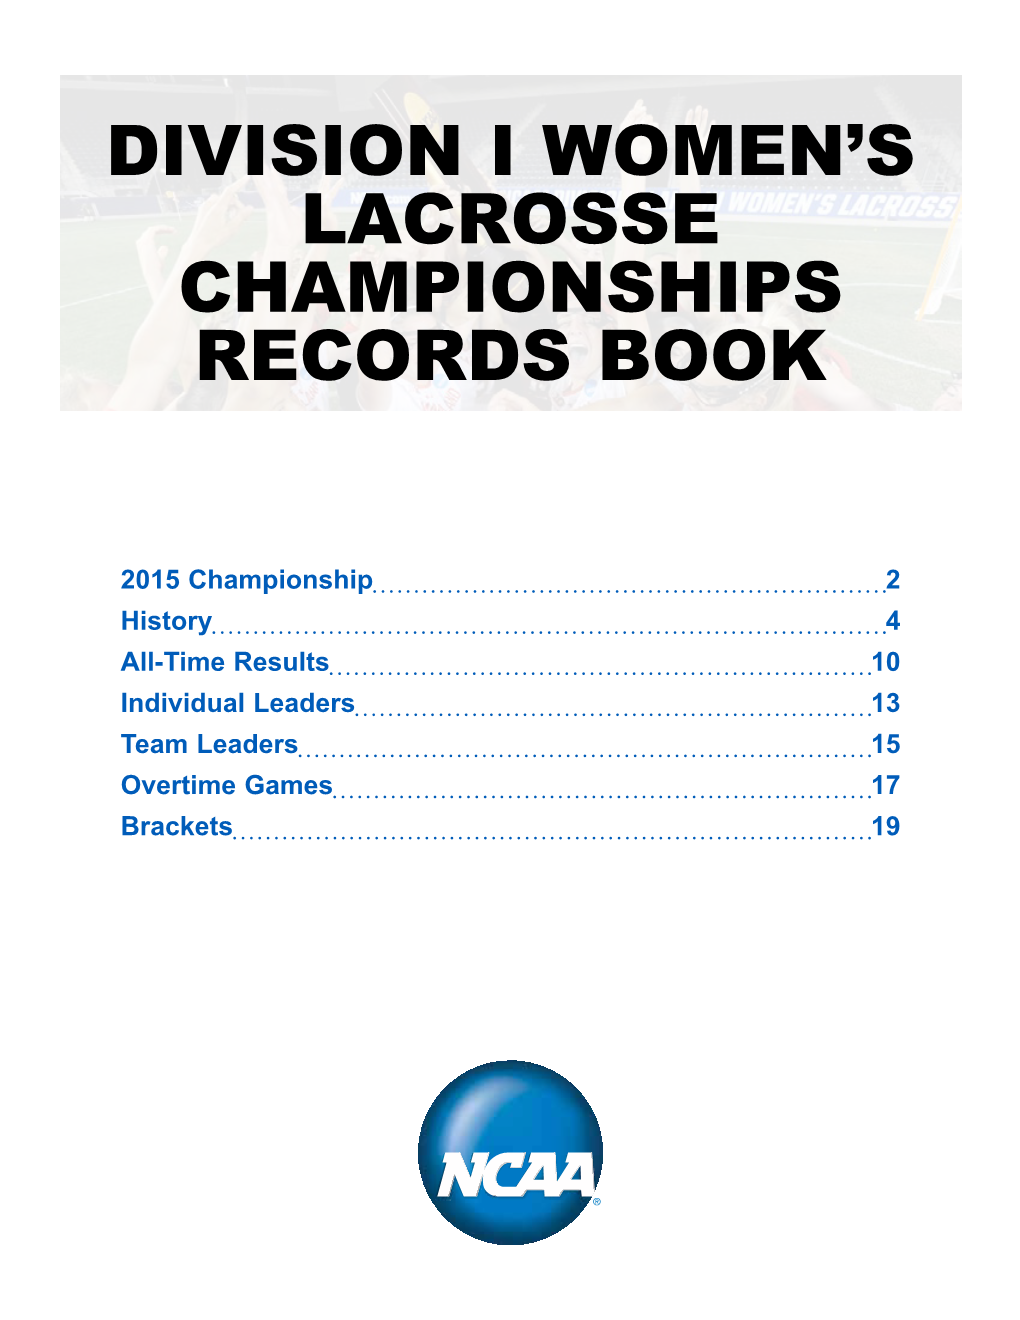 Lacrosse Championships Records Book